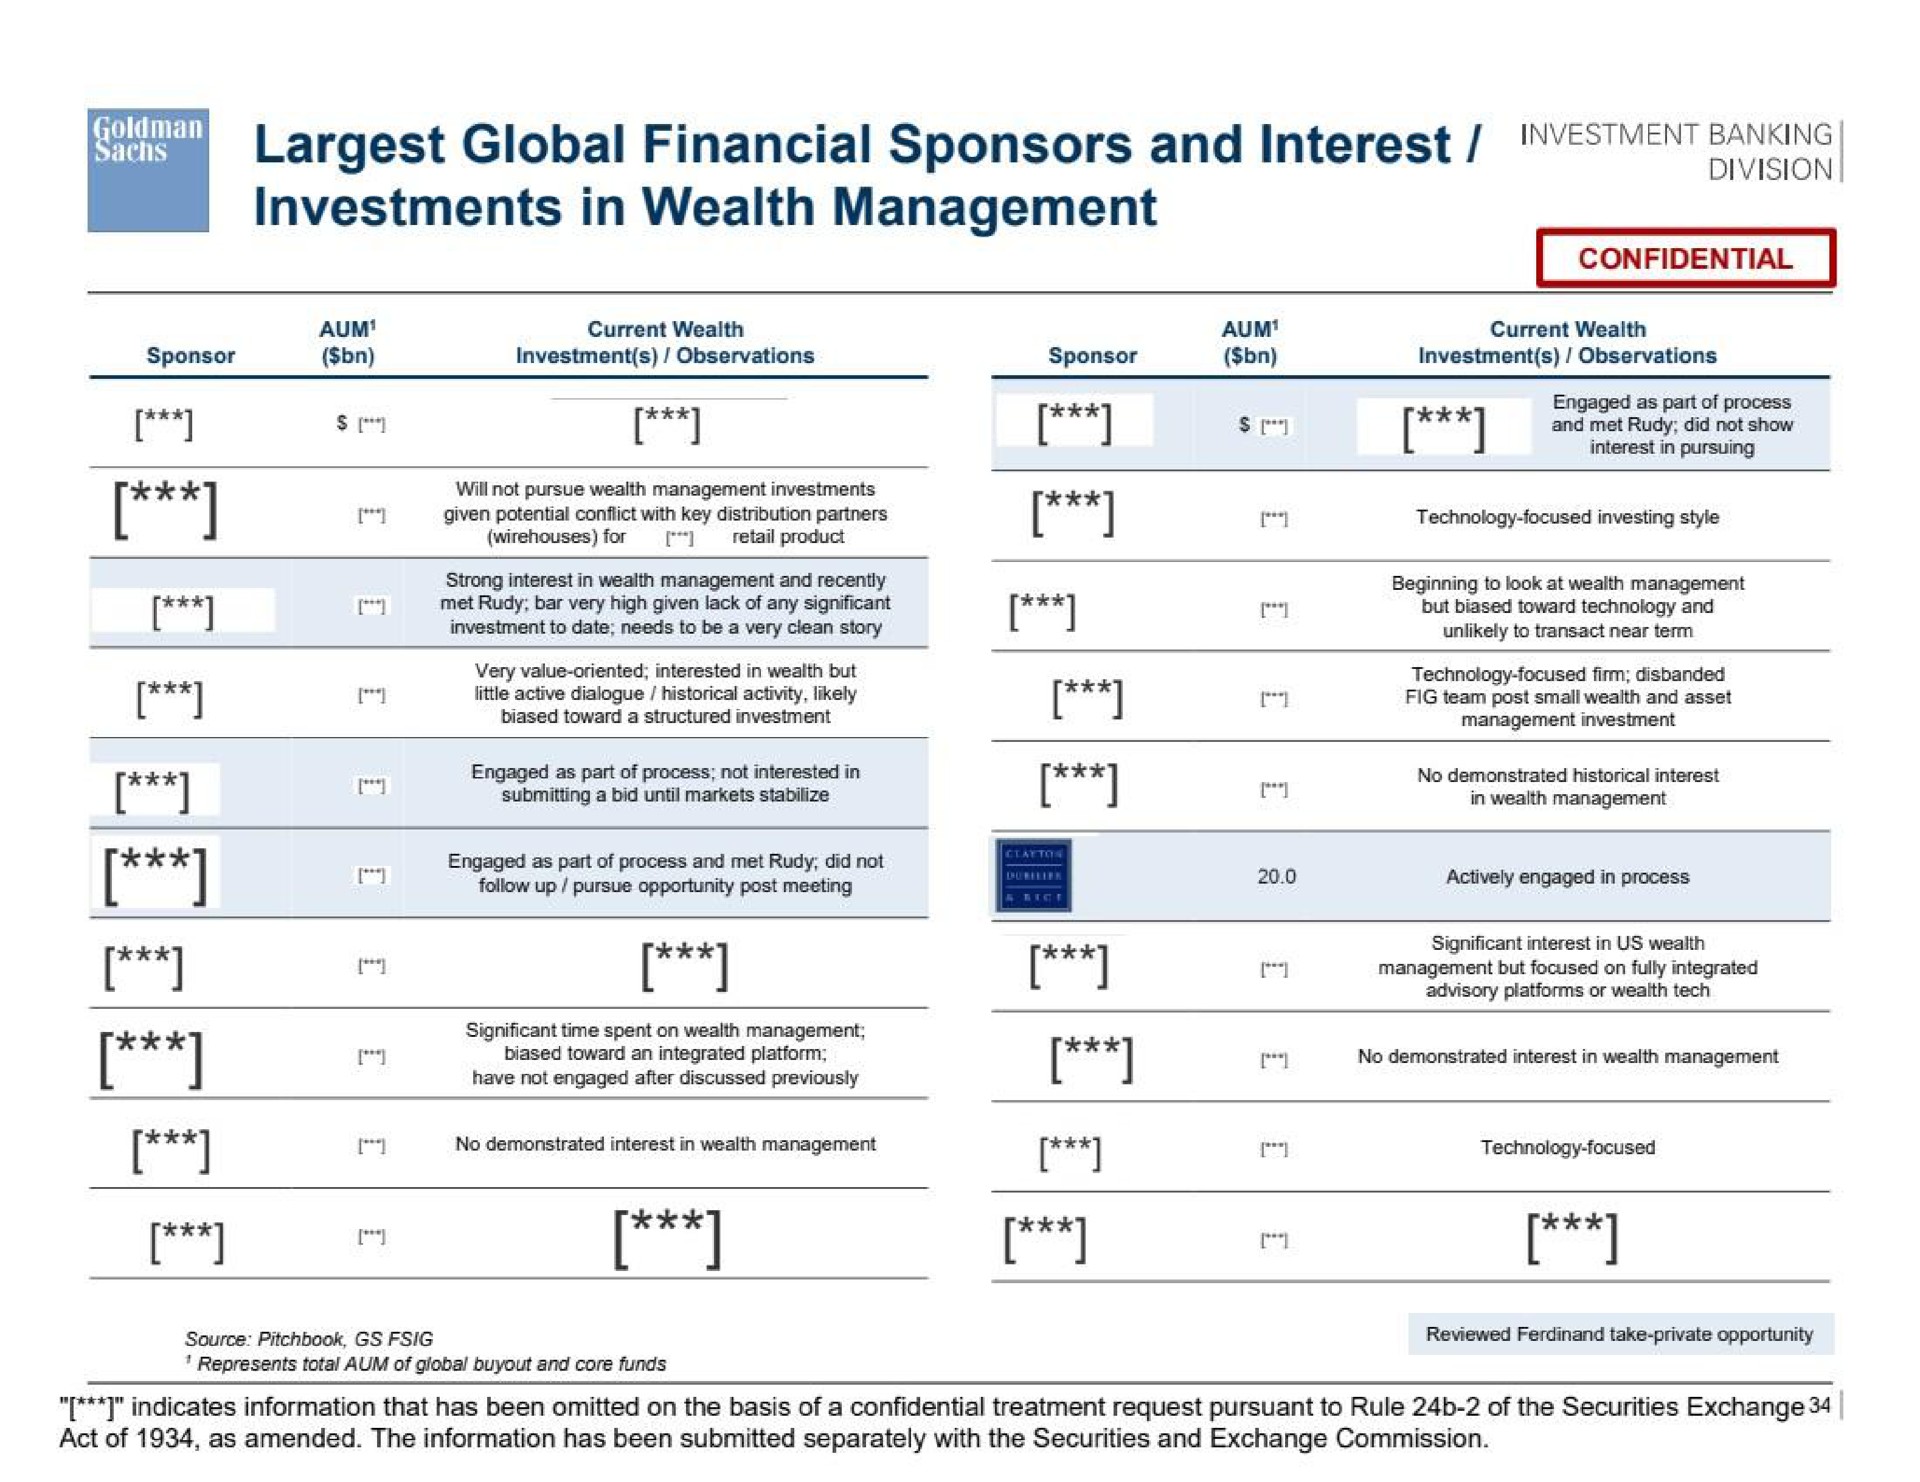 global financial sponsors and interest investments in wealth management a on | Goldman Sachs